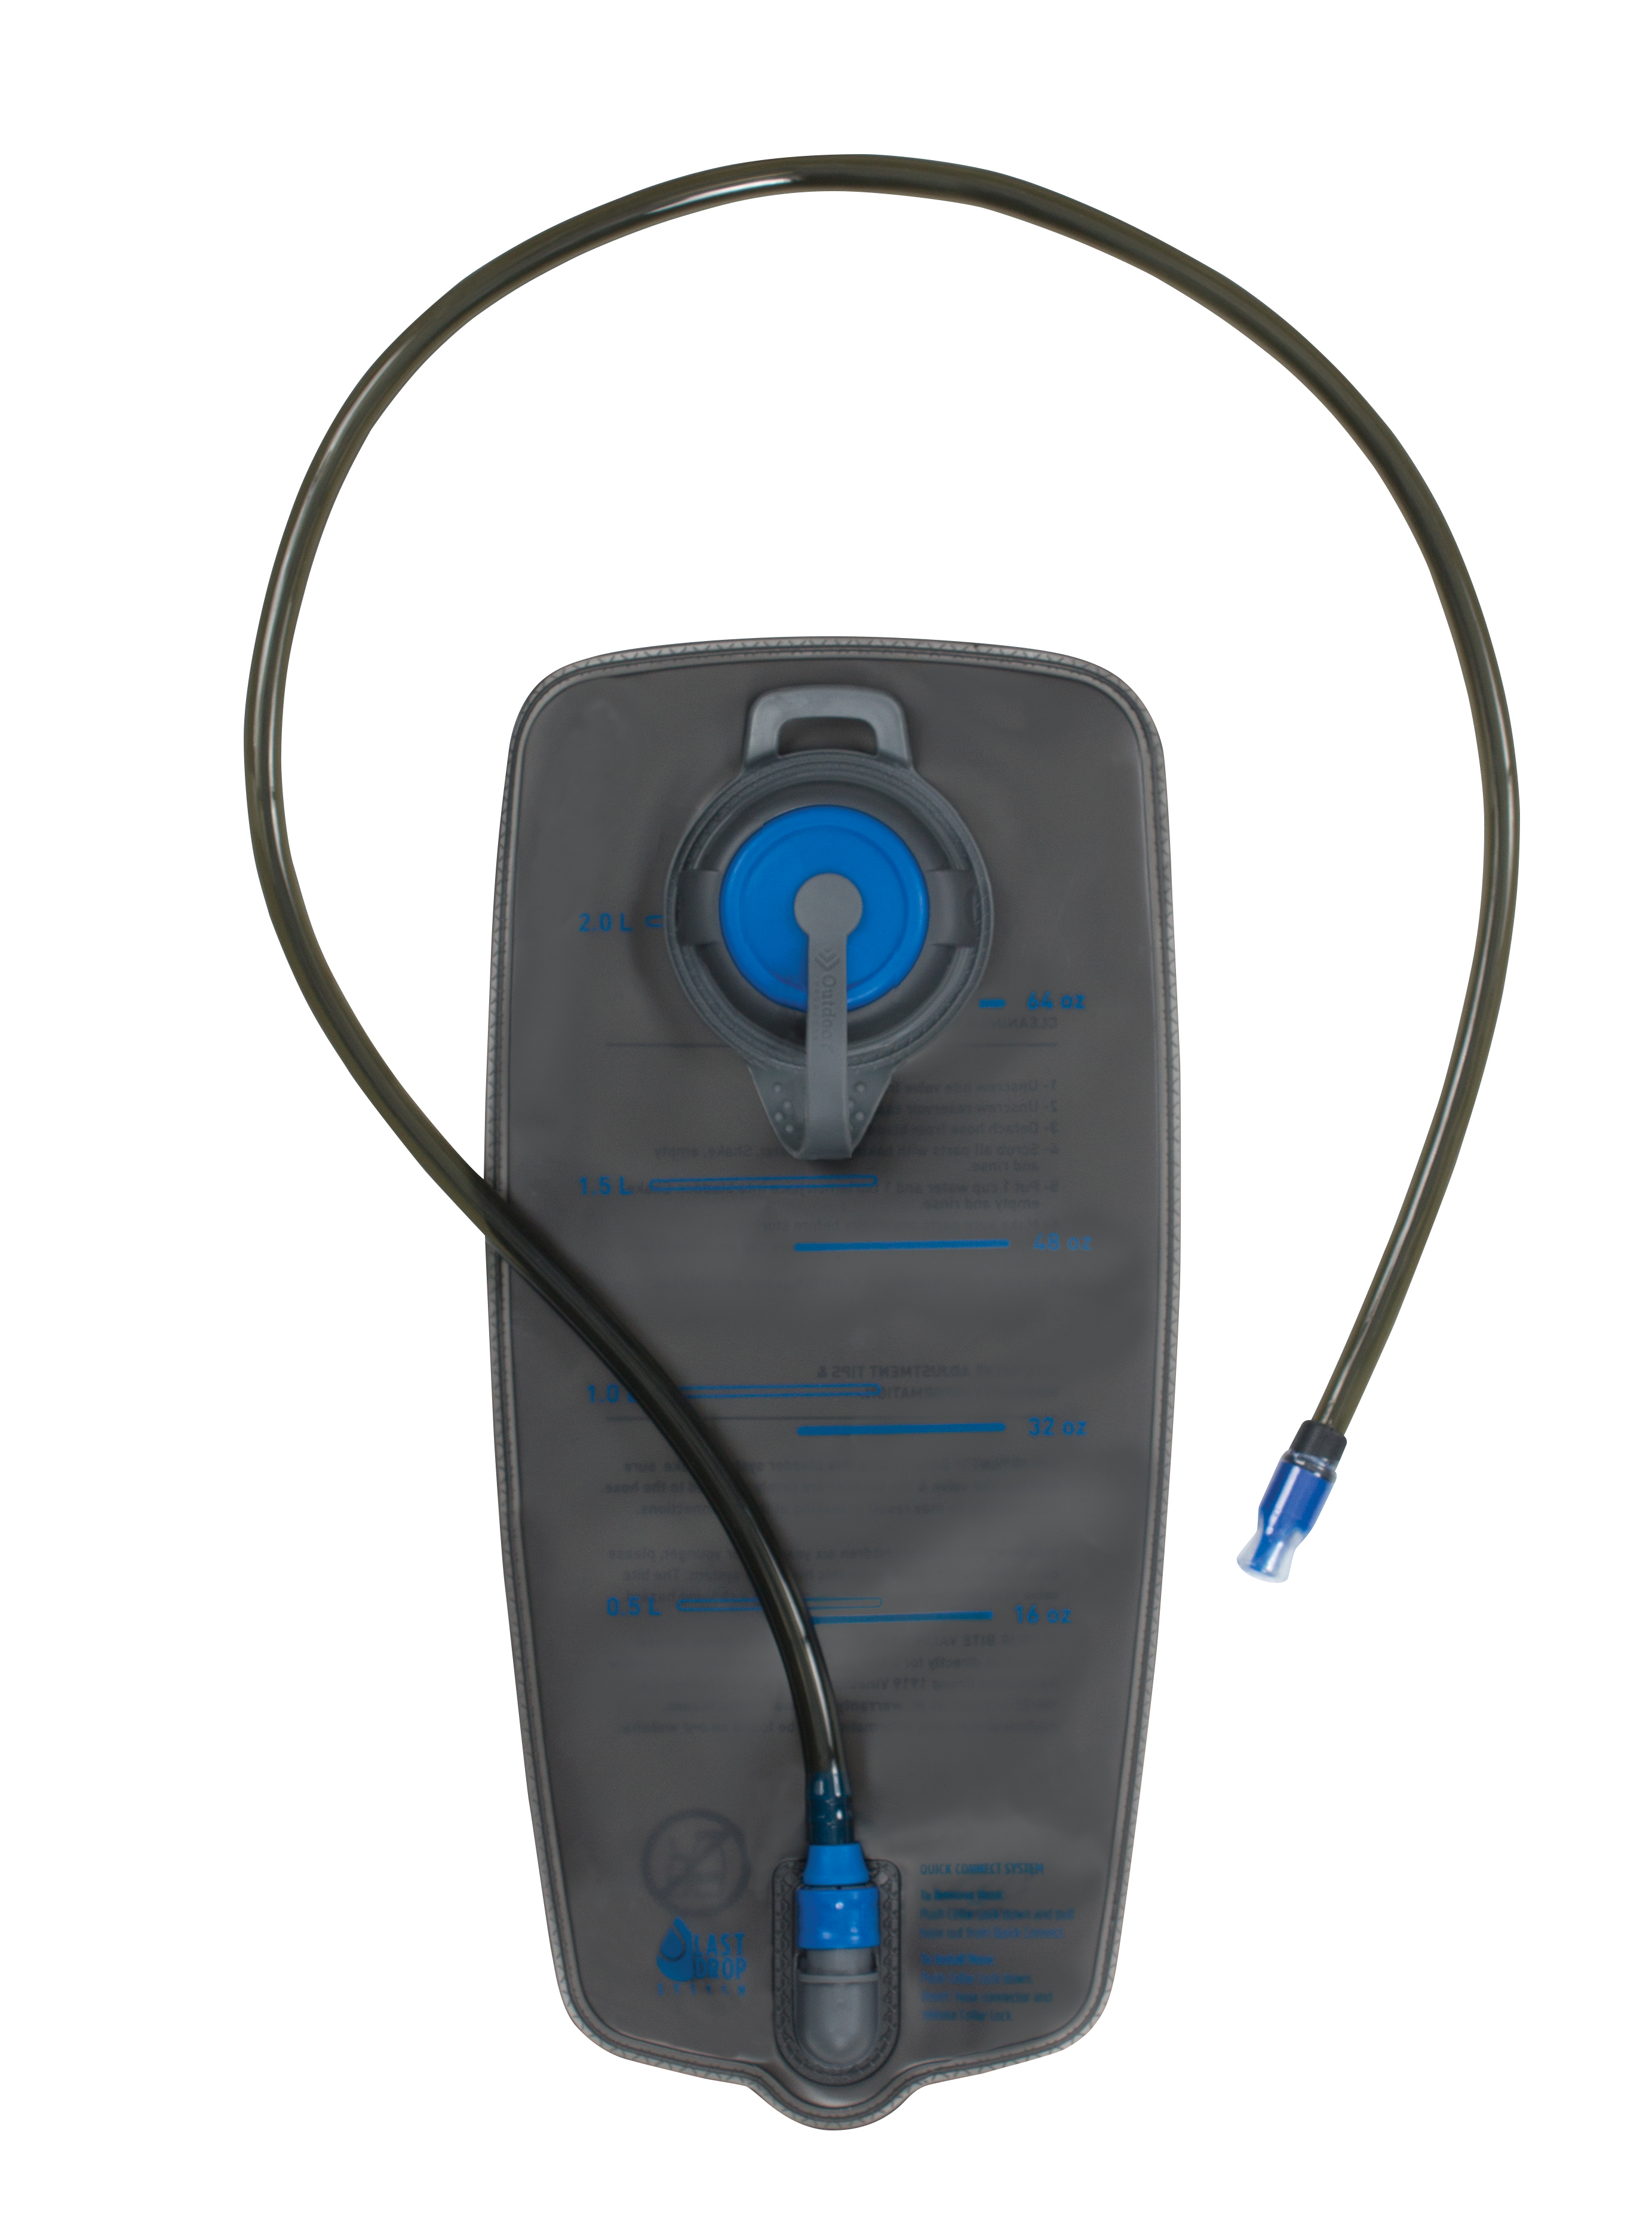 Outdoor Products, Cyclone 2 Ltr Hydration Reservoir, Charcoal, 2 Liter Capacity - image 1 of 6